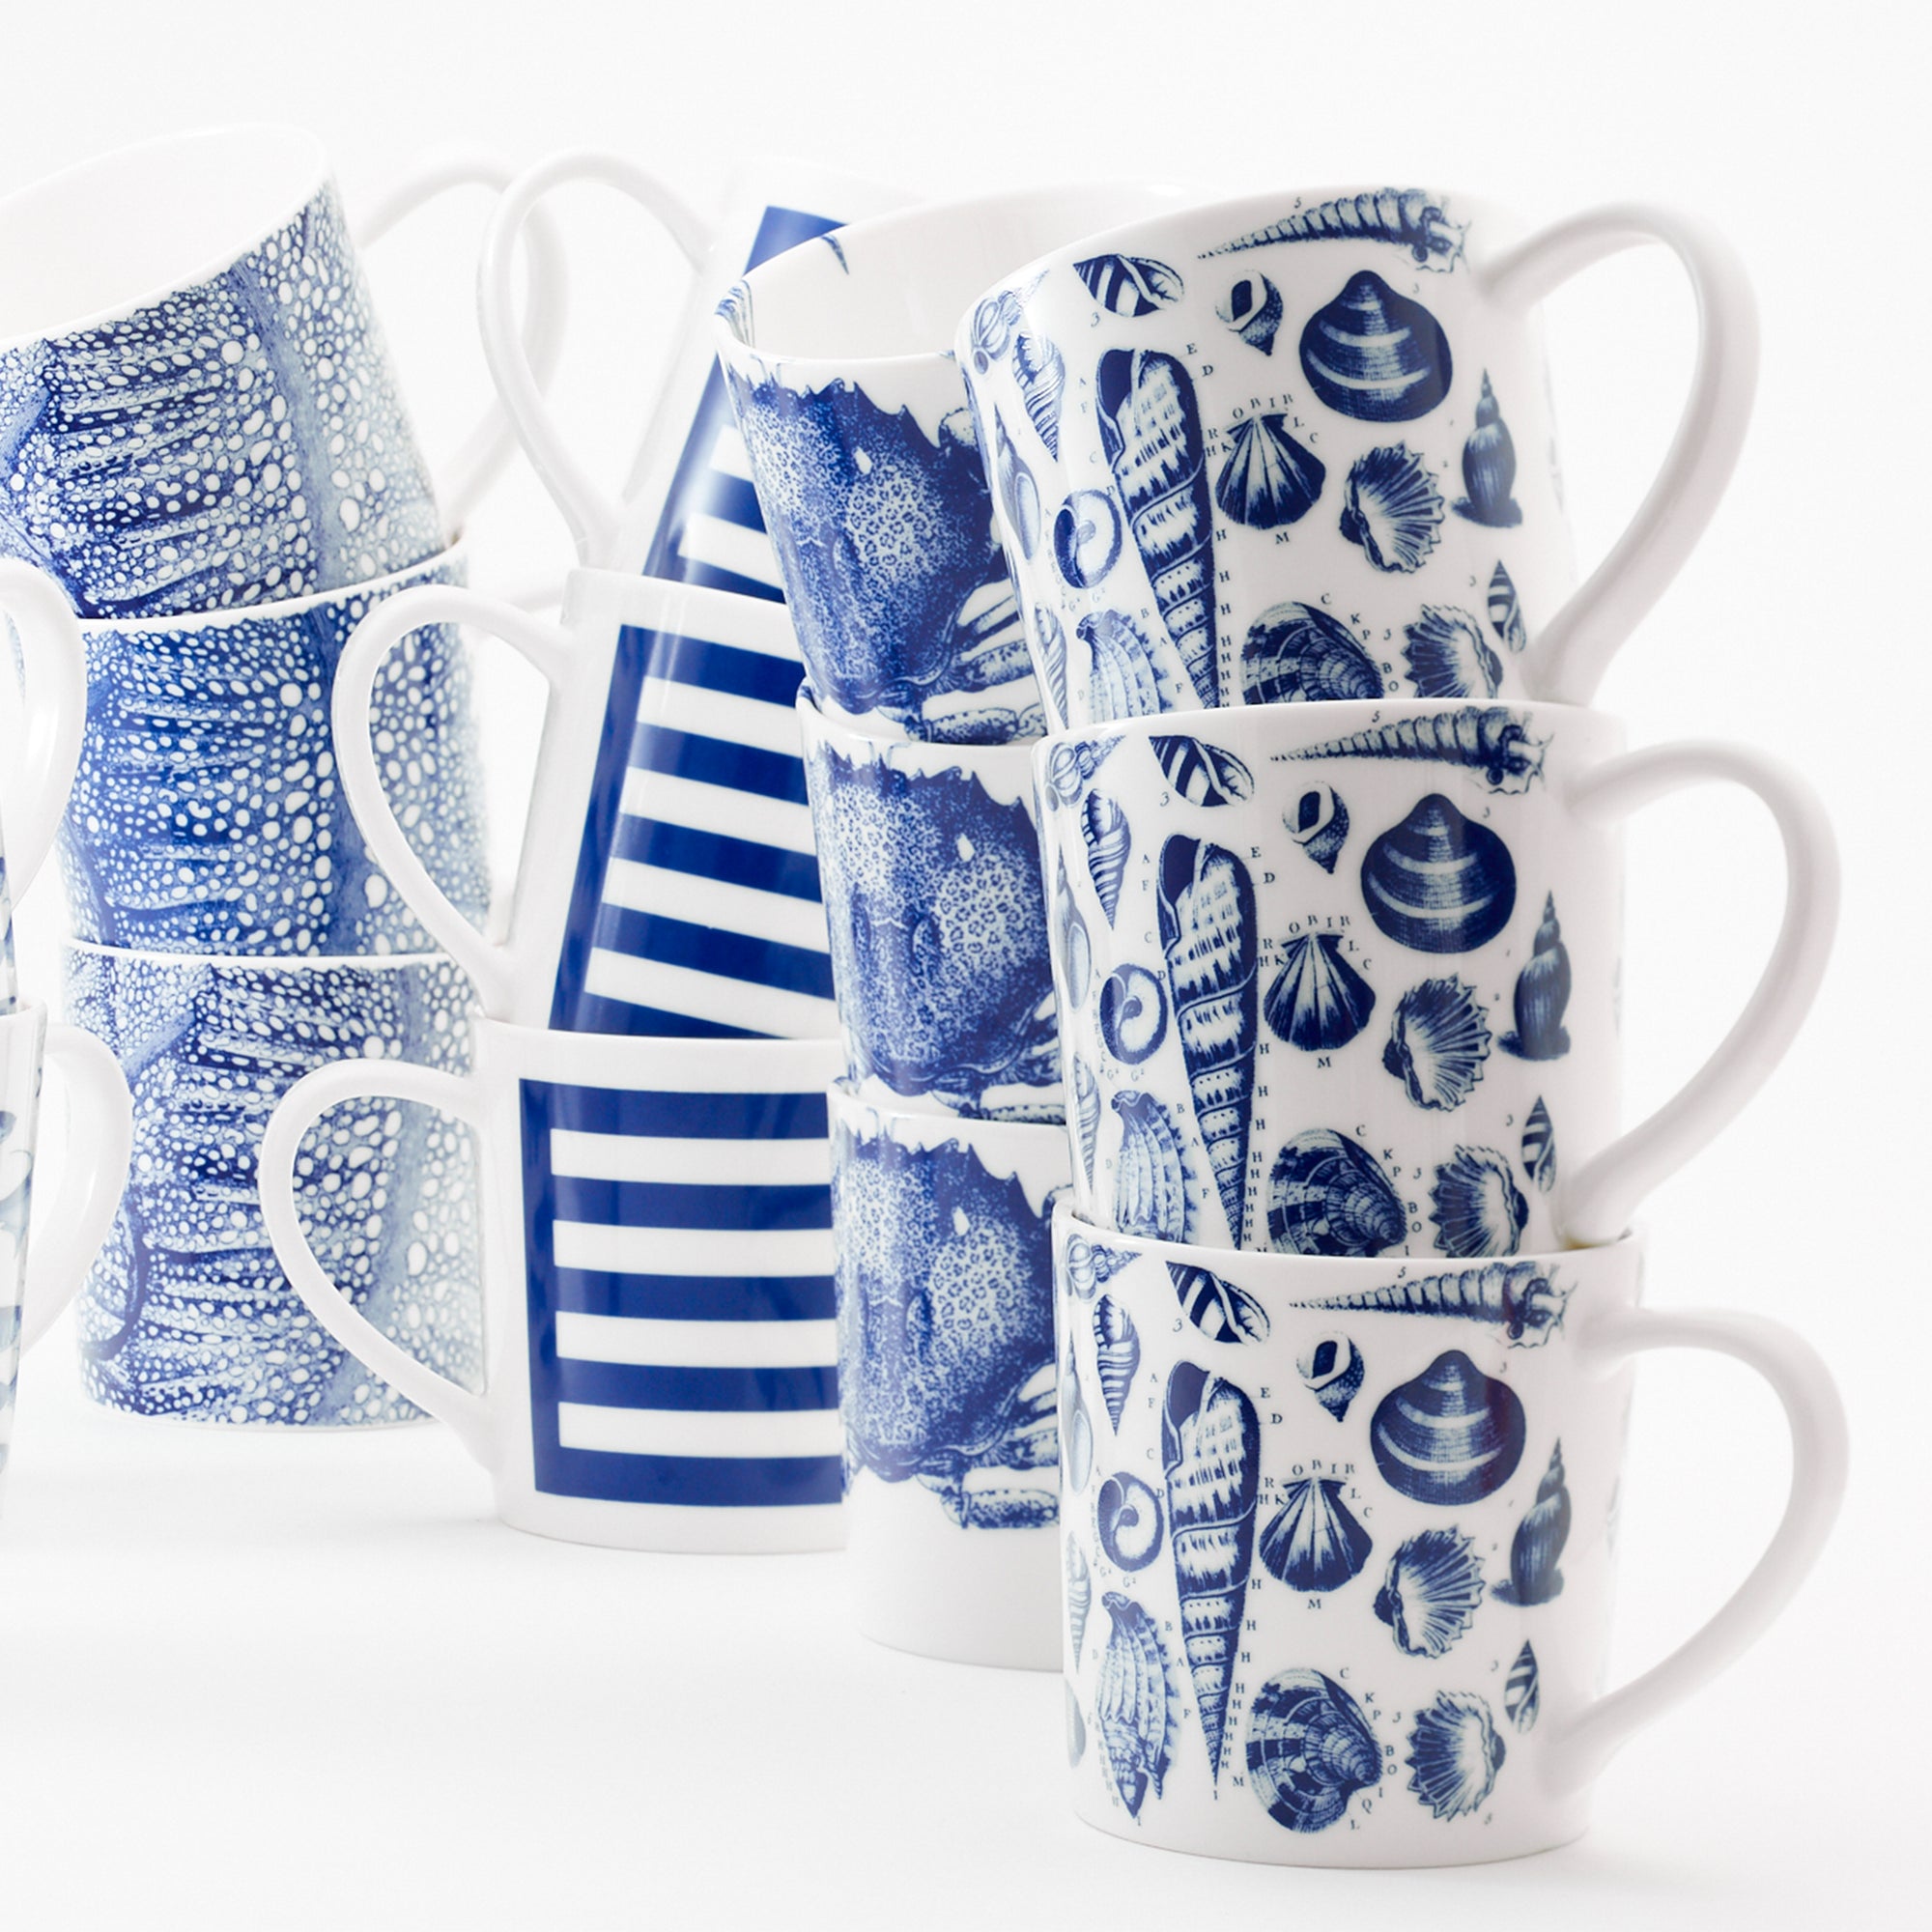 A Caskata Artisanal Home Shells Mug made of high-fired porcelain, featuring blue seashell and ocean-themed designs. This white ceramic marvel is also dishwasher safe.